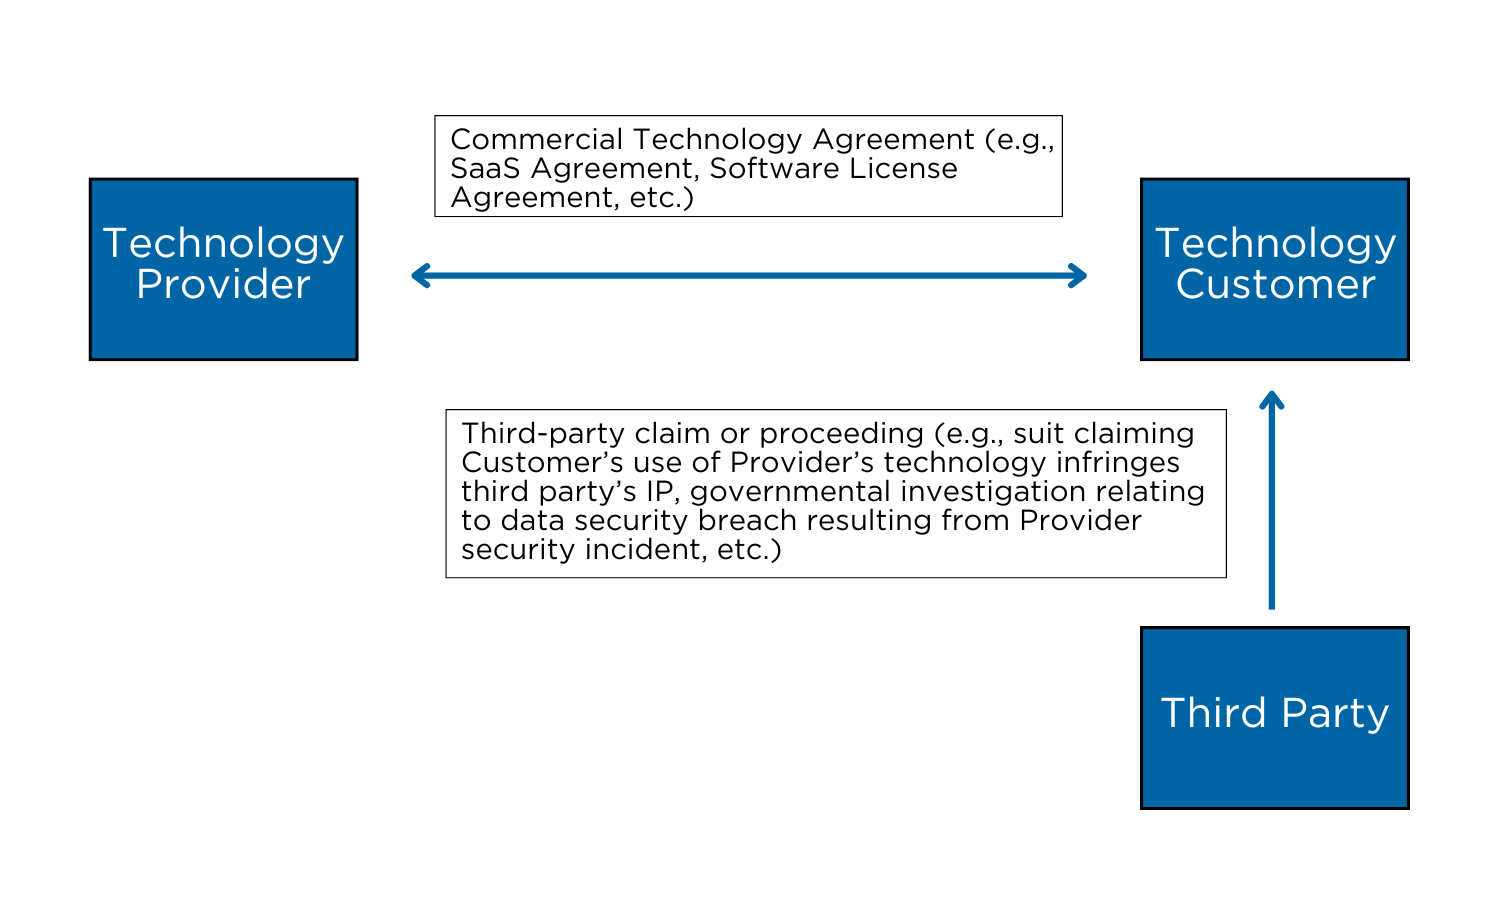 Diagram illustrating indemnification relationships between three parties: Technology Provider, Technology Customer, and Third Party. The Technology Provider and Technology Customer are connected by a bidirectional arrow, indicating a mutual relationship. The Technology Customer and Third Party are connected by a unidirectional arrow pointing from Third Party to Technology Customer, indicating a one-way relationship.